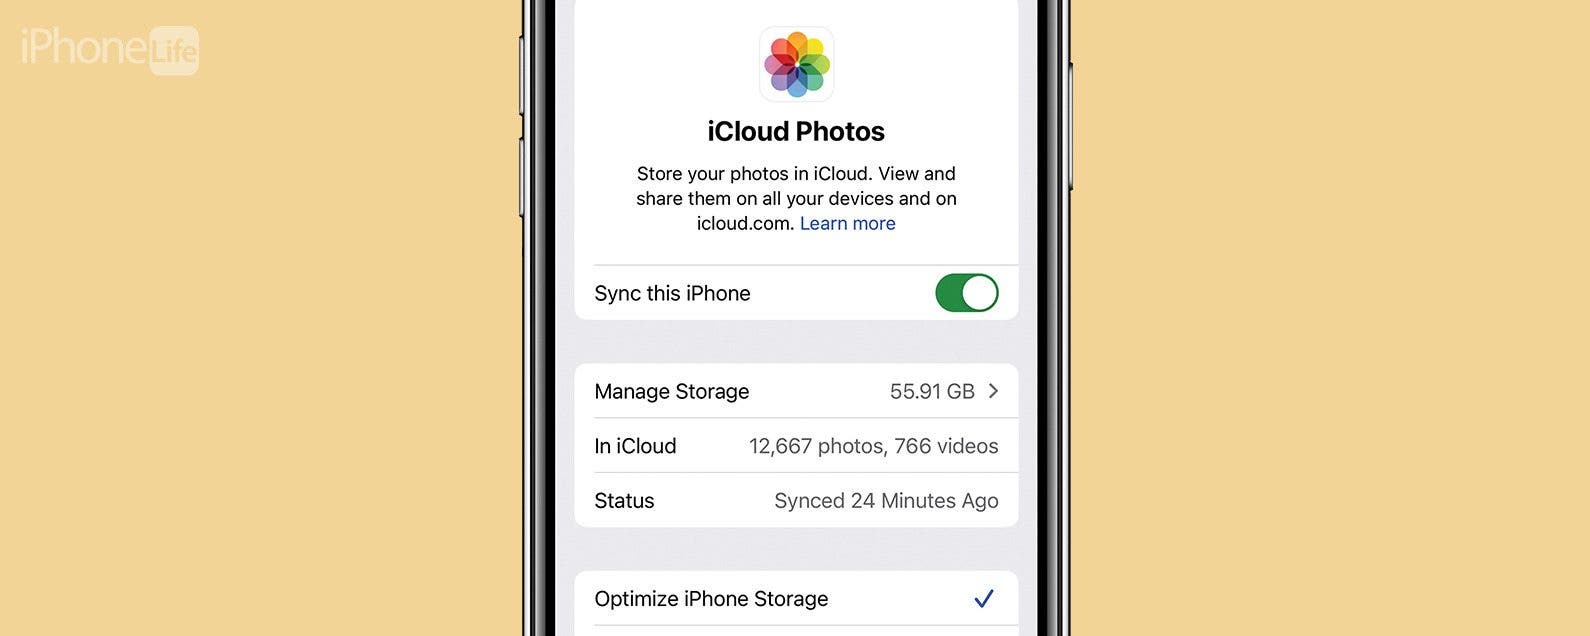 17 fixes for iCloud Mail not working on iPhone, iPad, Mac, Web